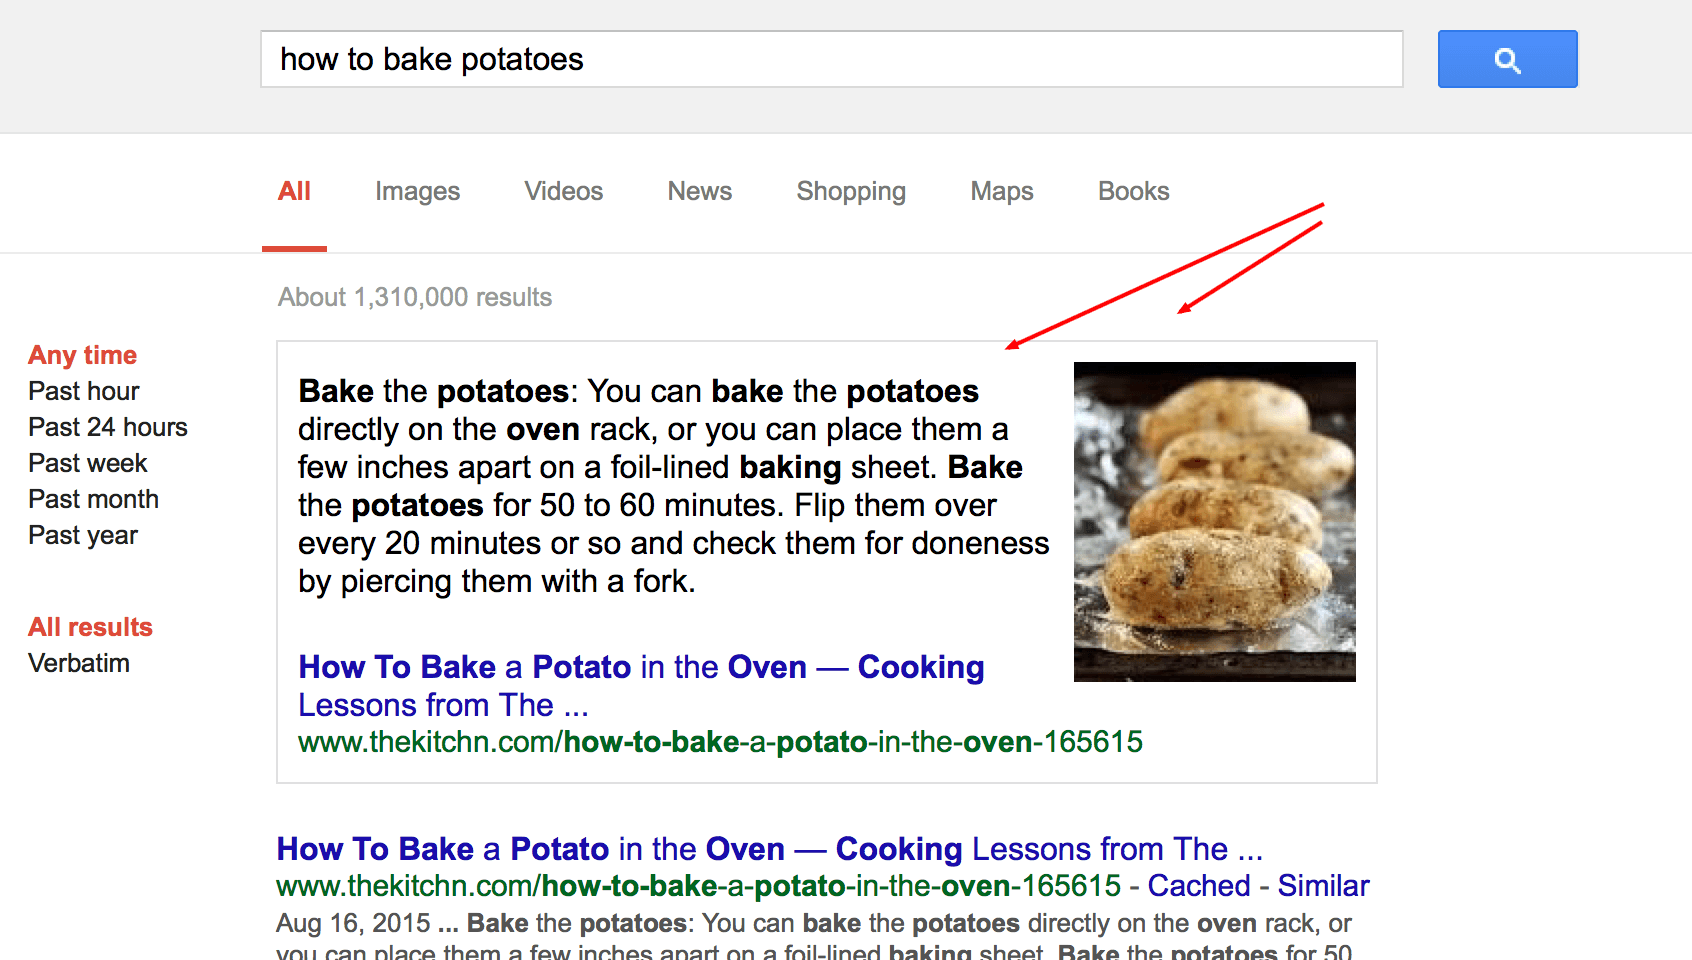 Google featured snippet example